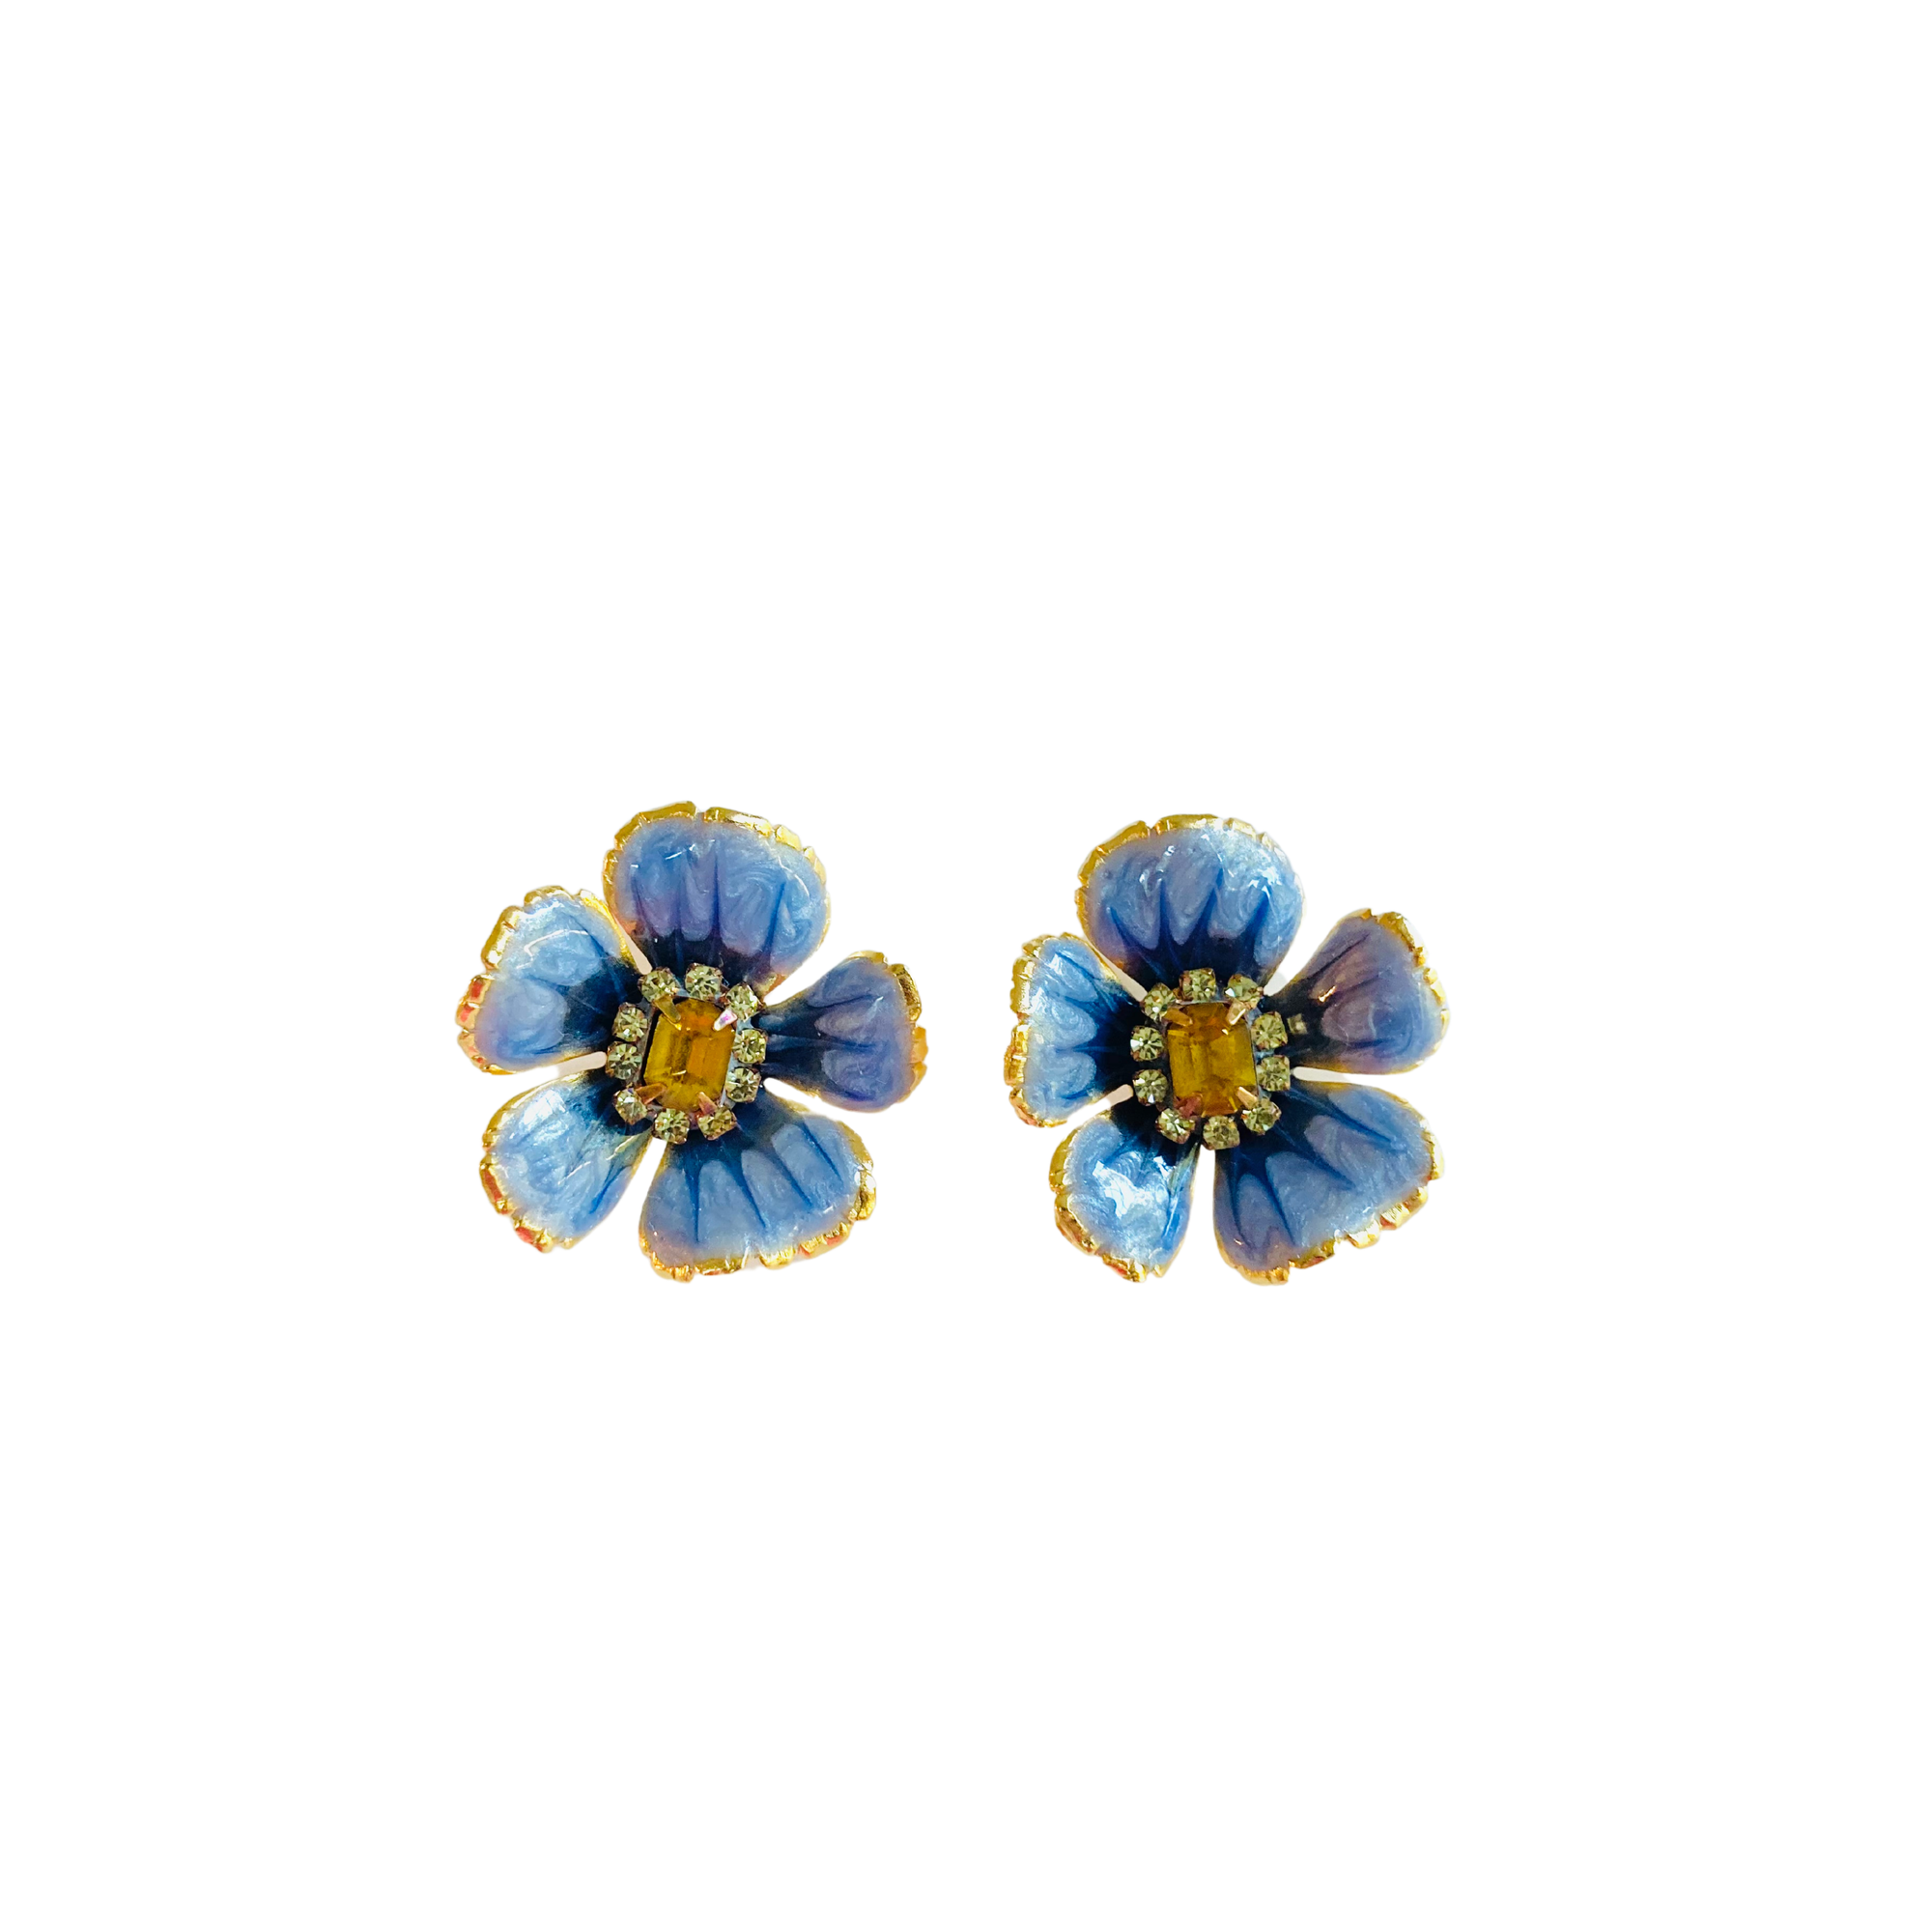 Hand-painted Floral Statement Earrings